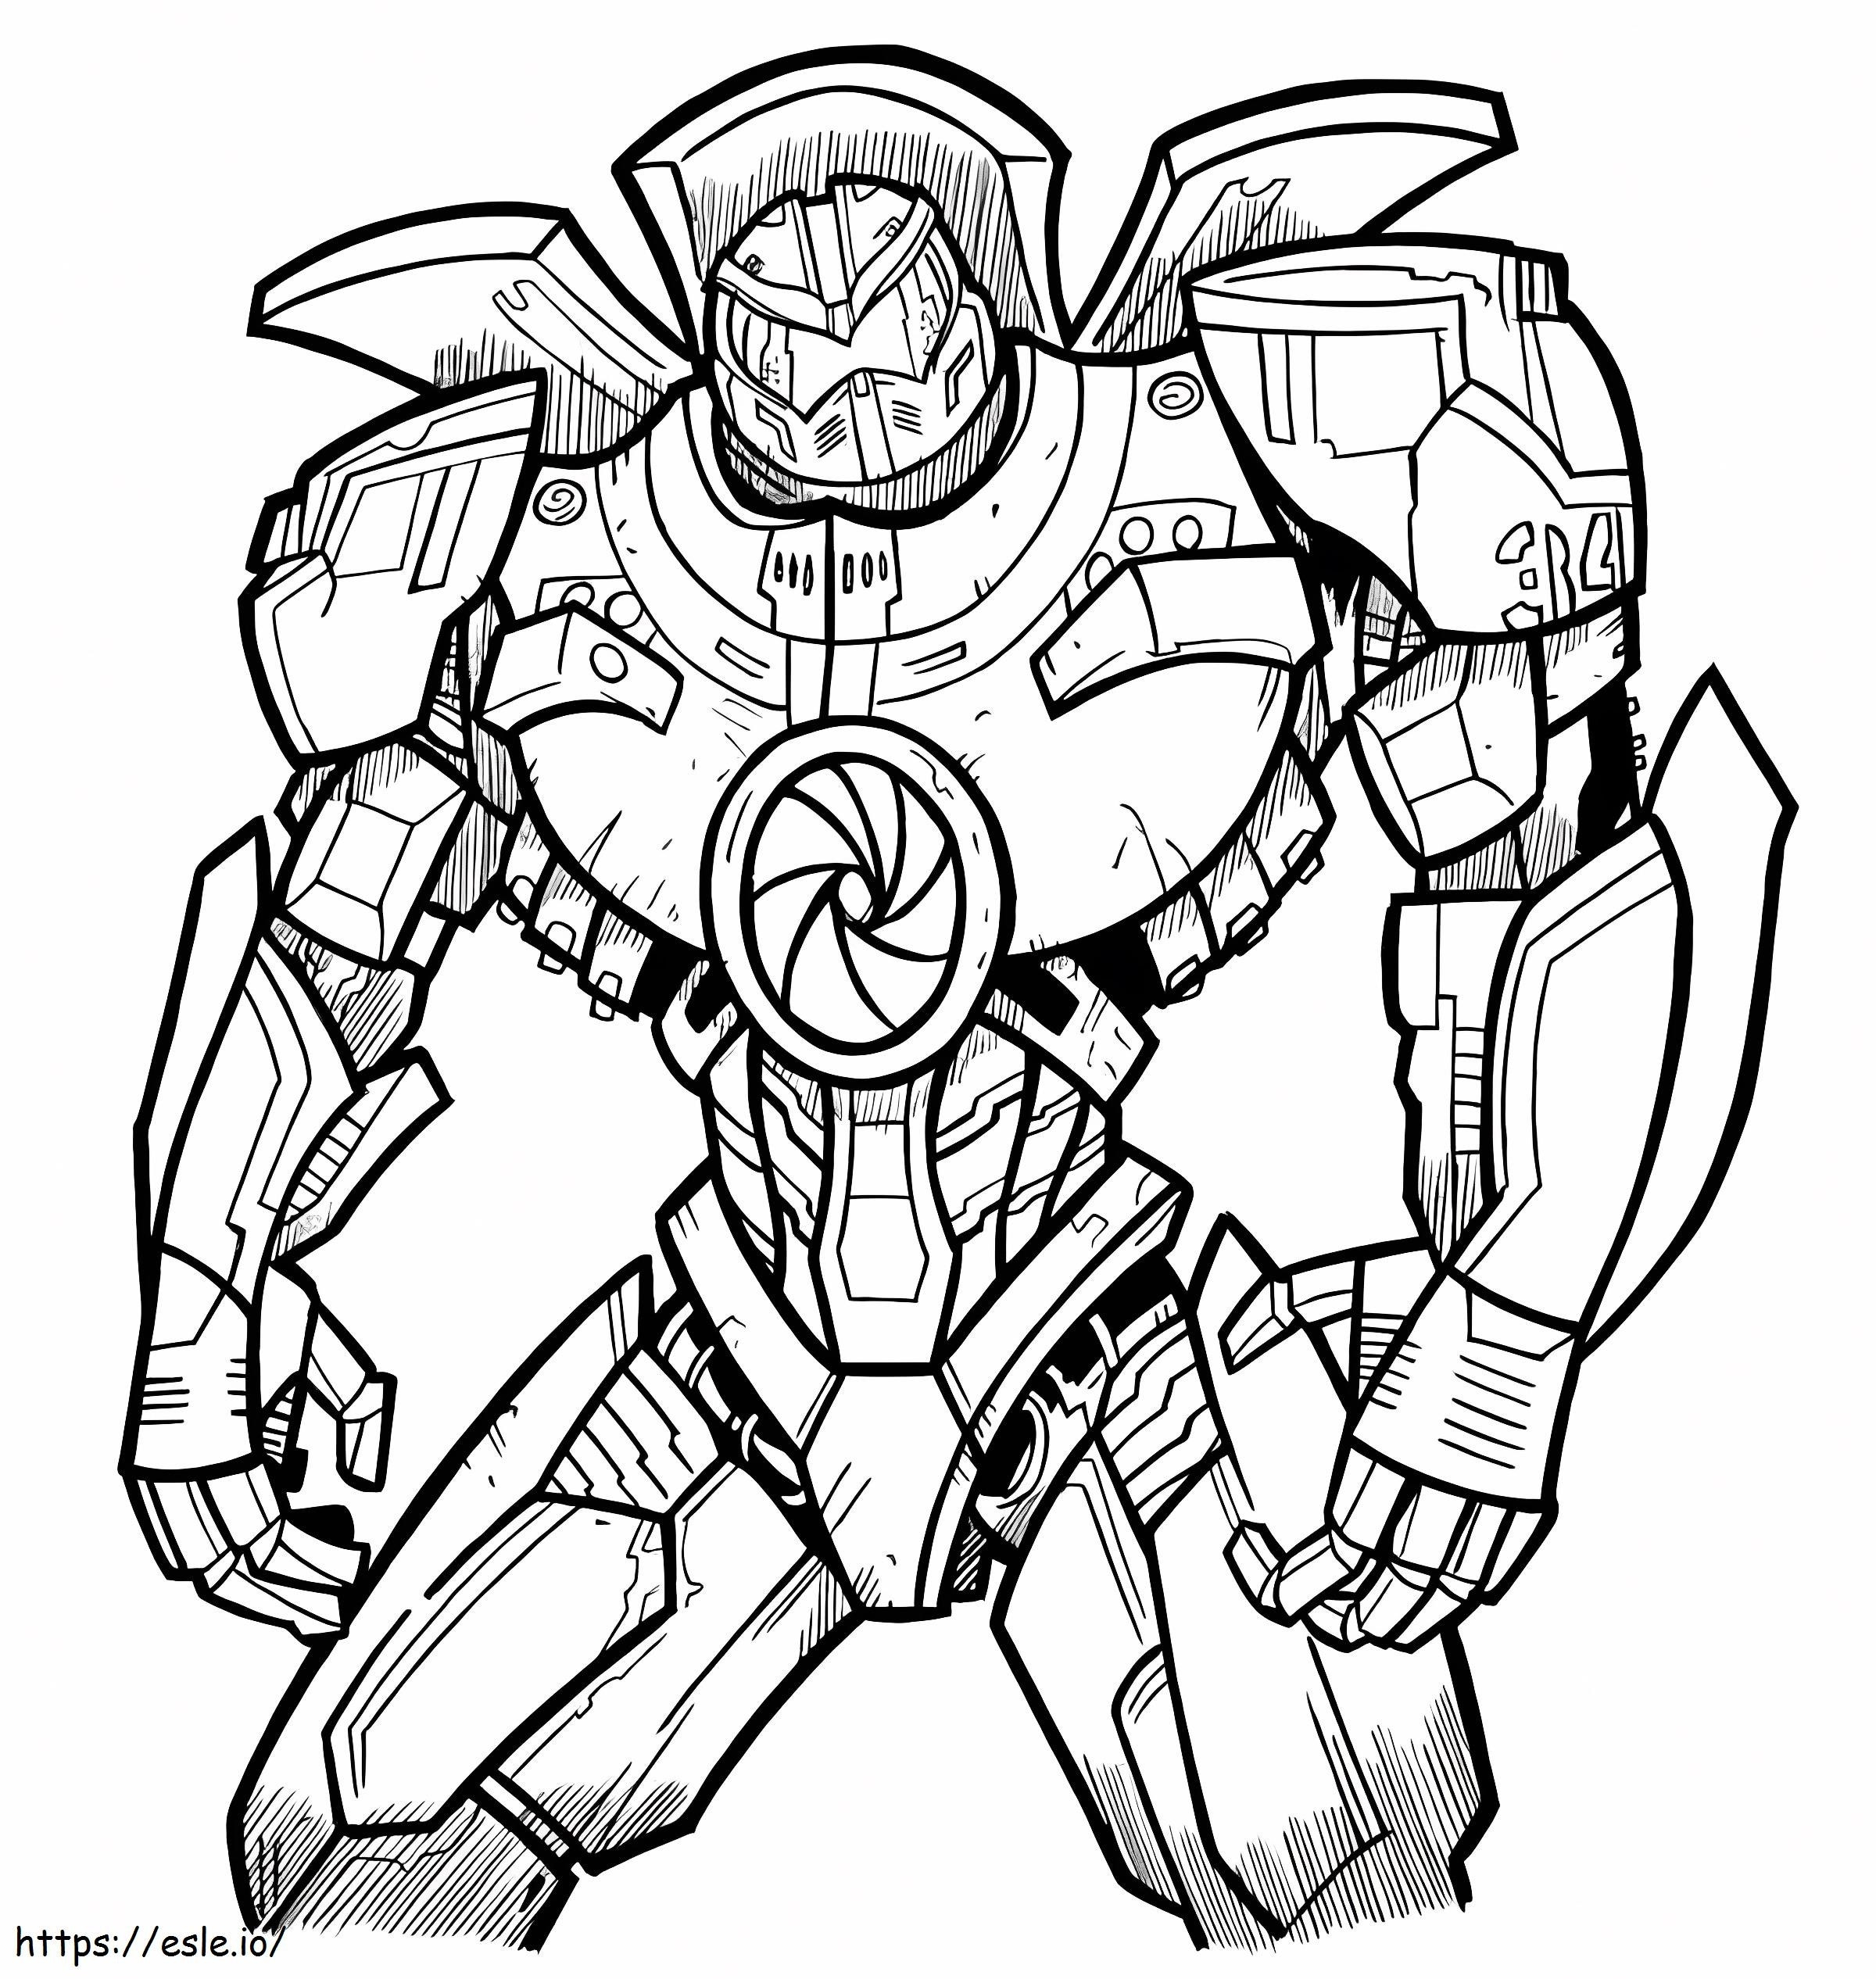 Gipsy Danger coloring page